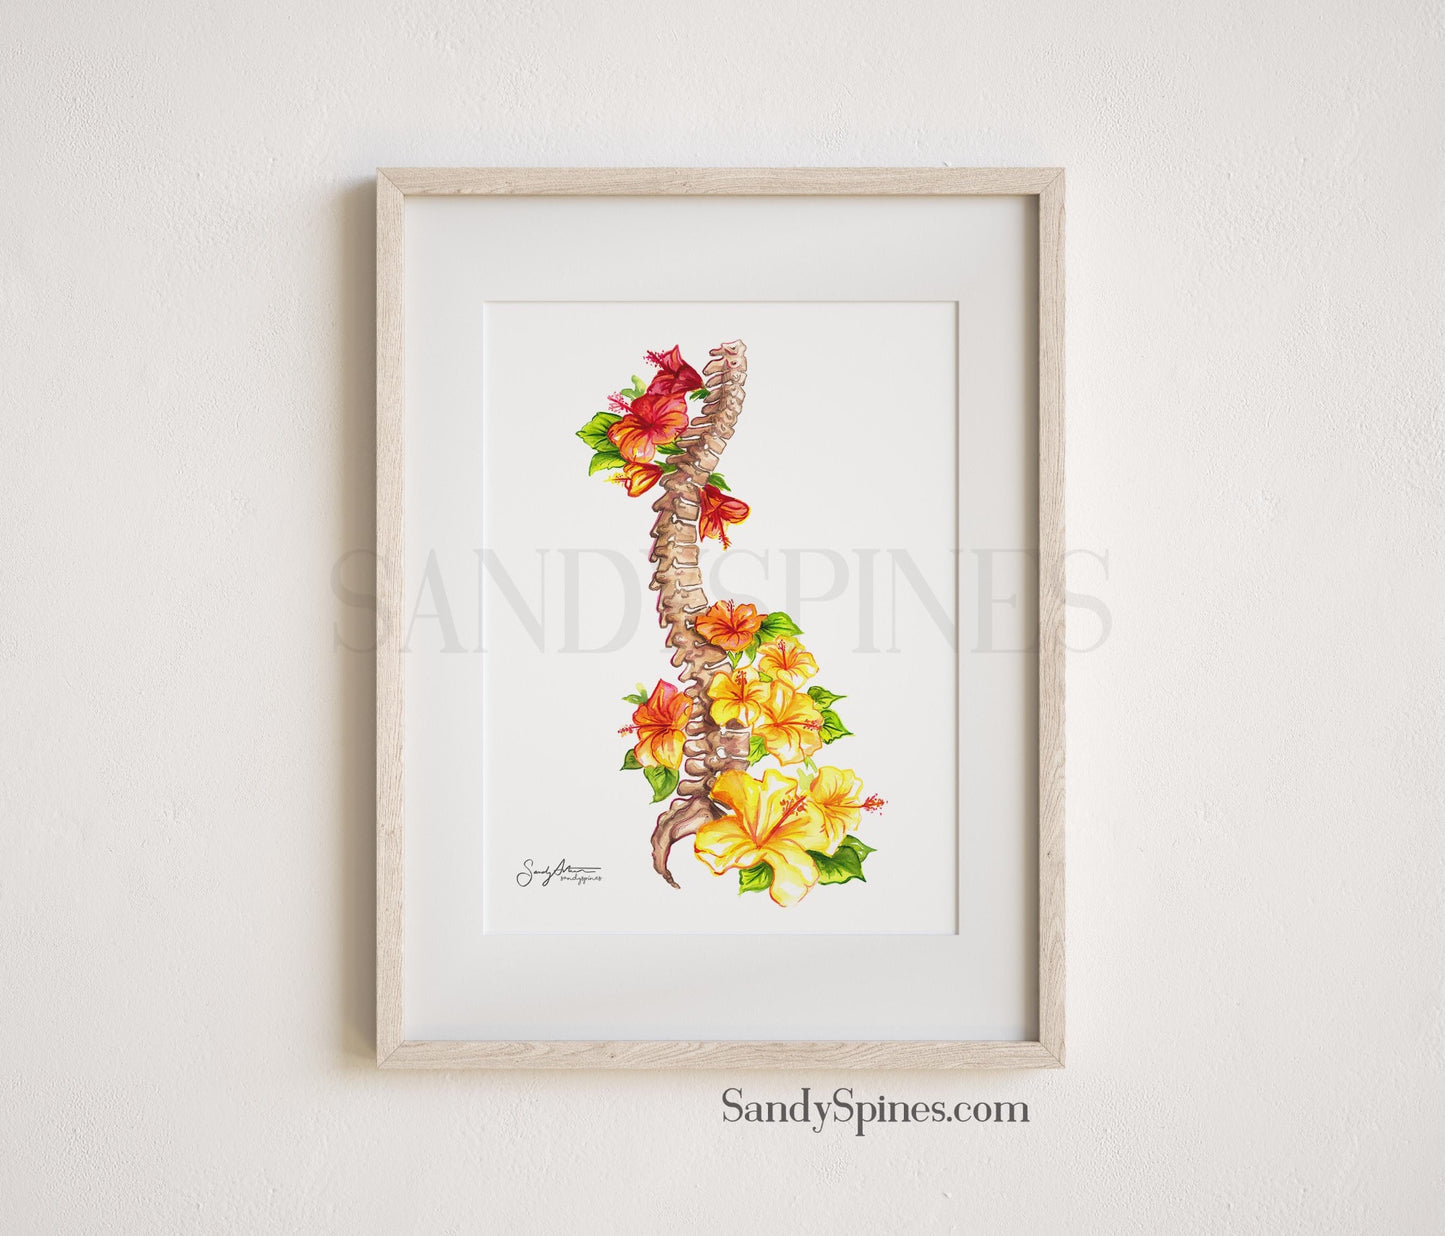 hibiscus spine watercolor painting with flowers around the anatomical spine